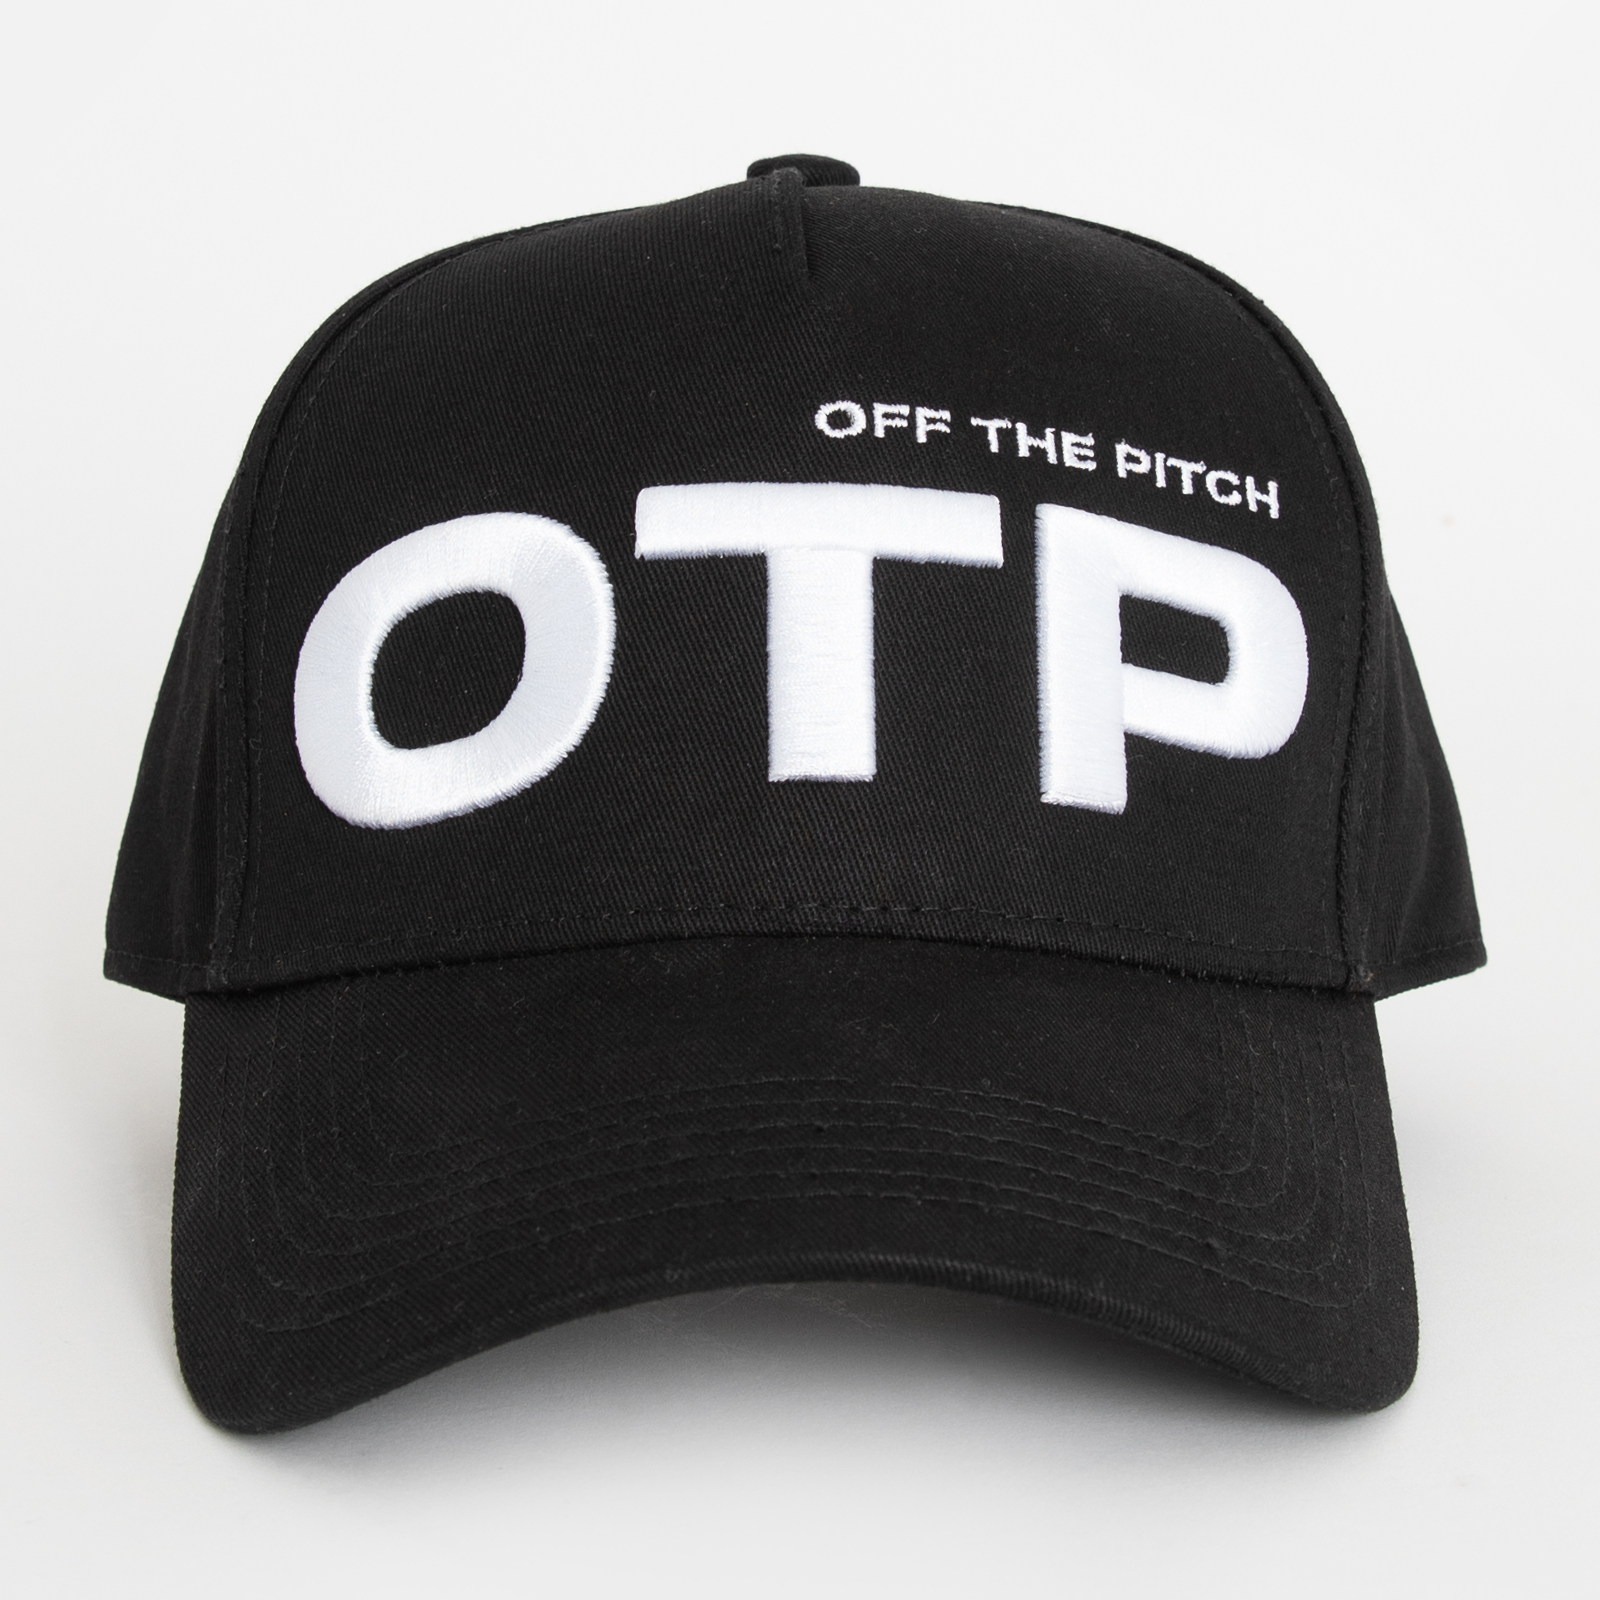 Off the Pitch Off-set Cap Black/White
